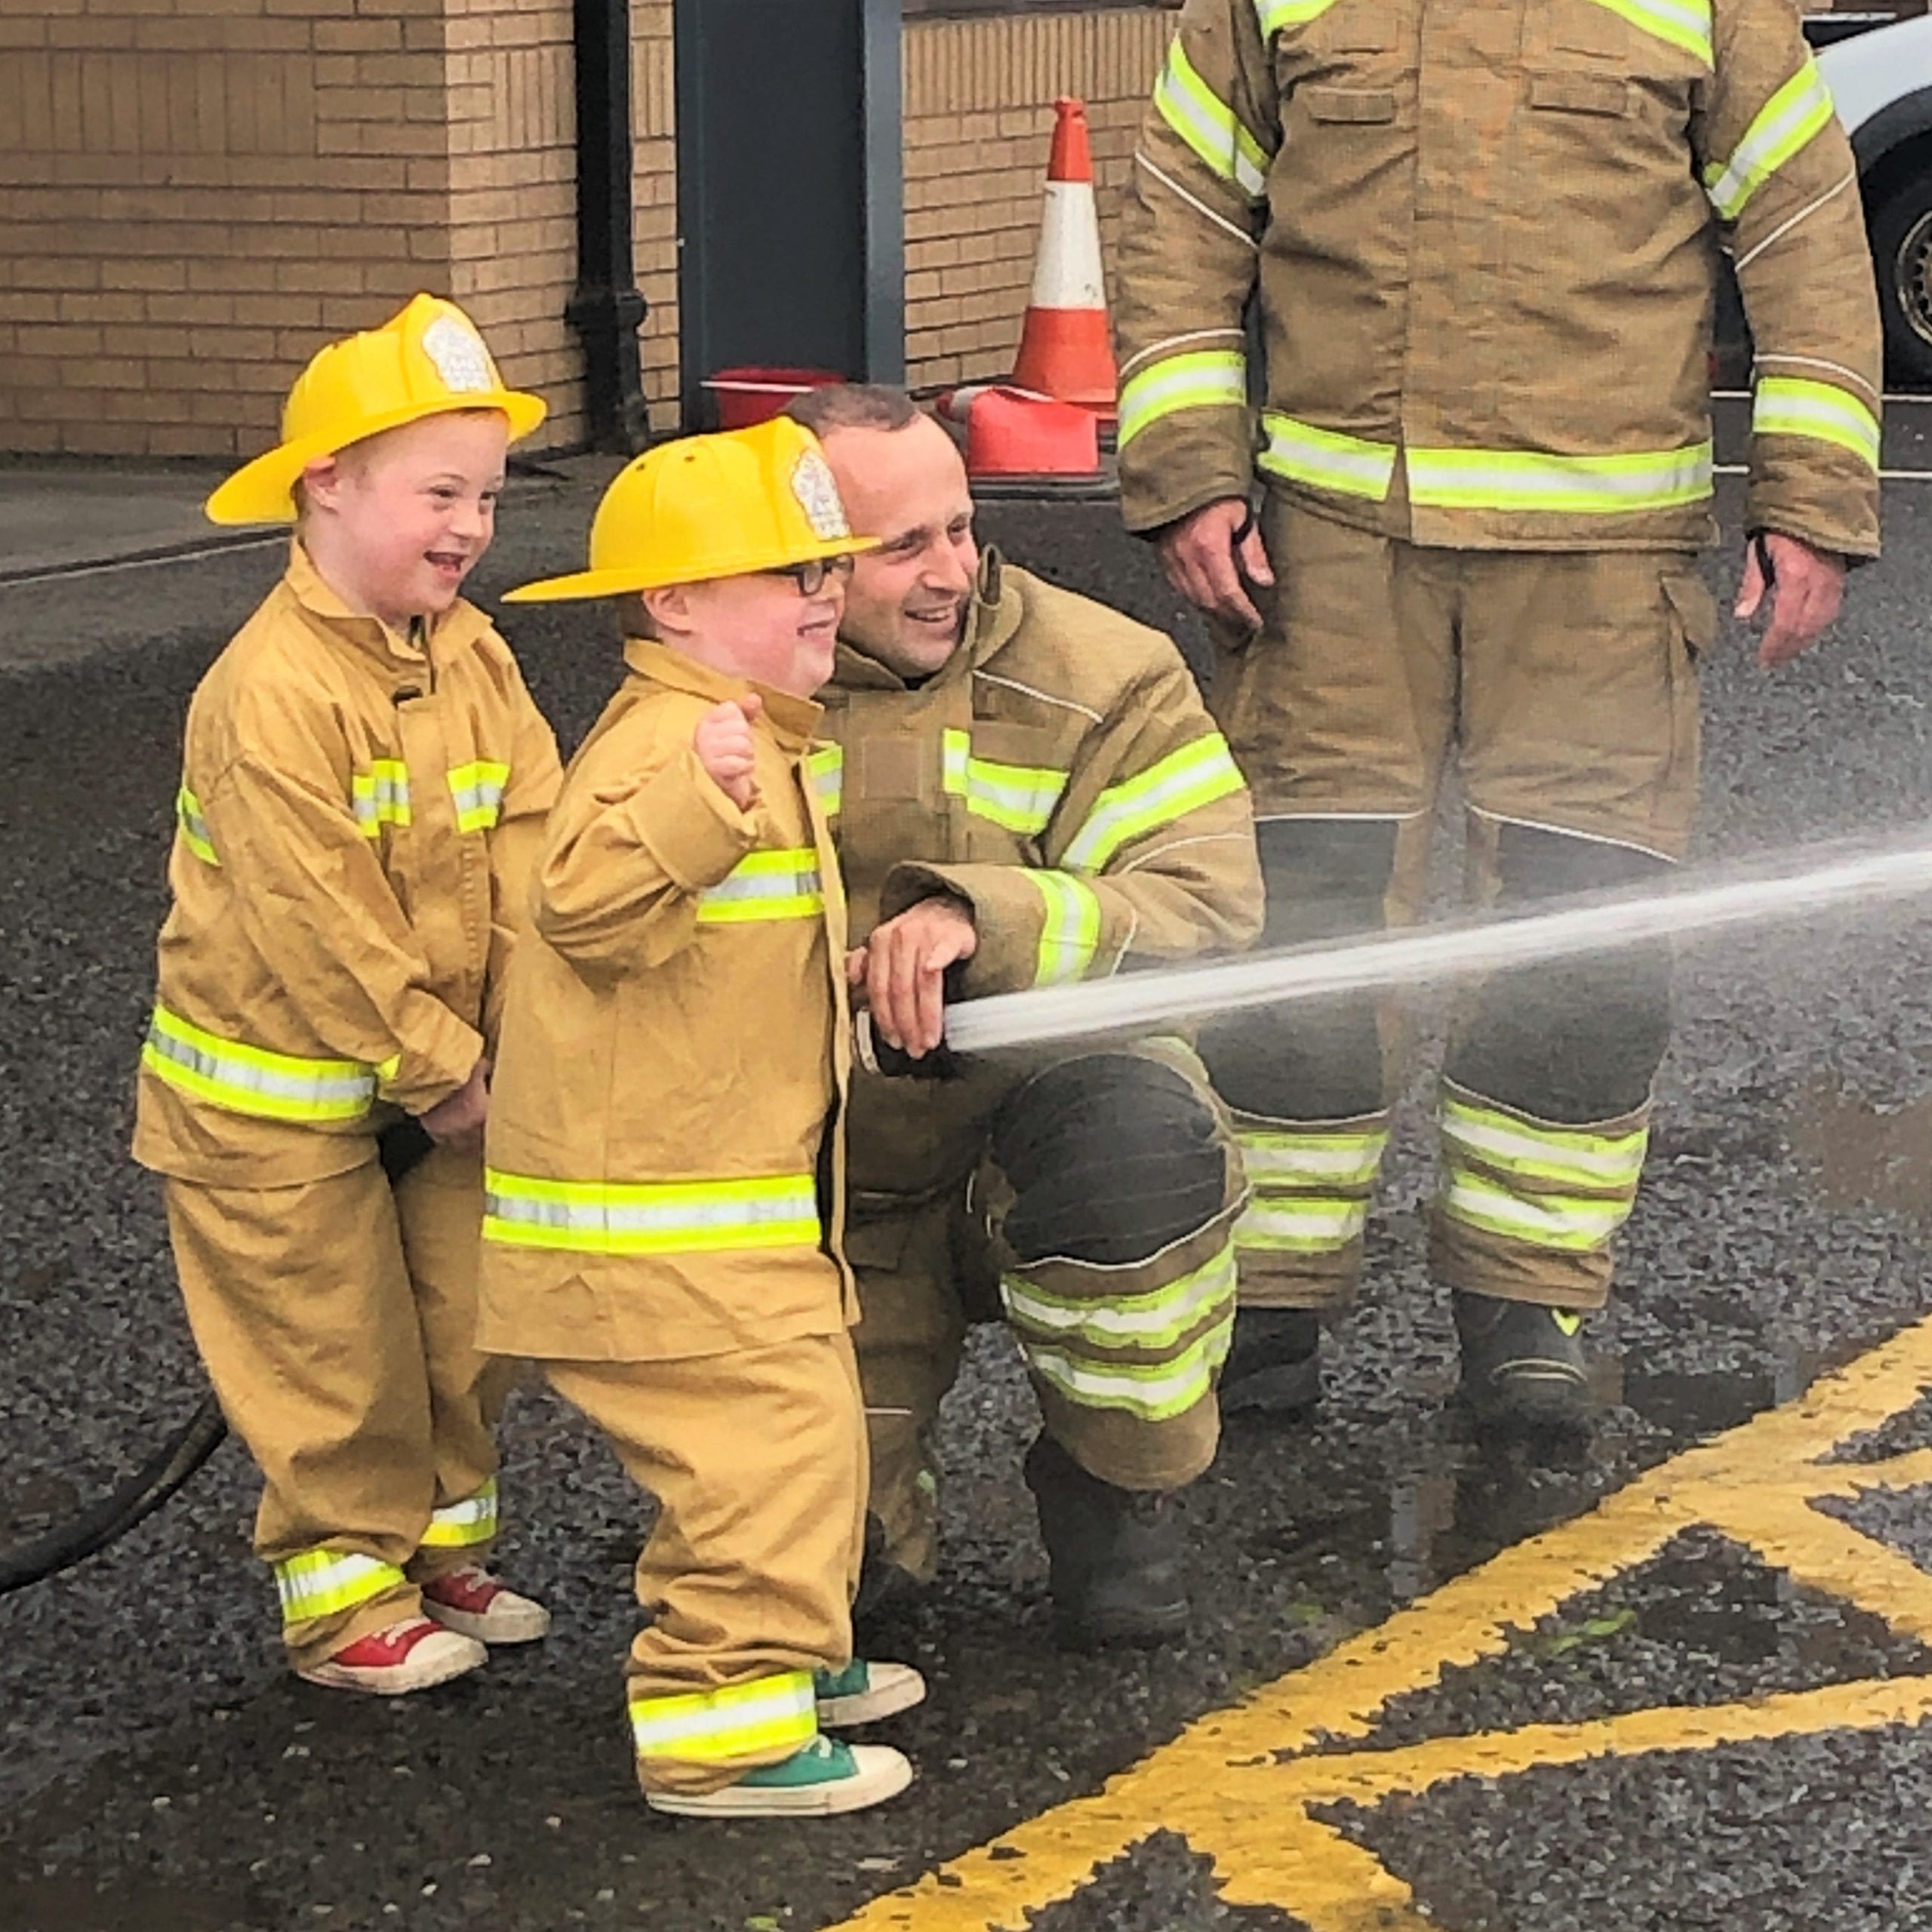 Two little boys in firemen's outfits and two firemen hold a hose on full blast